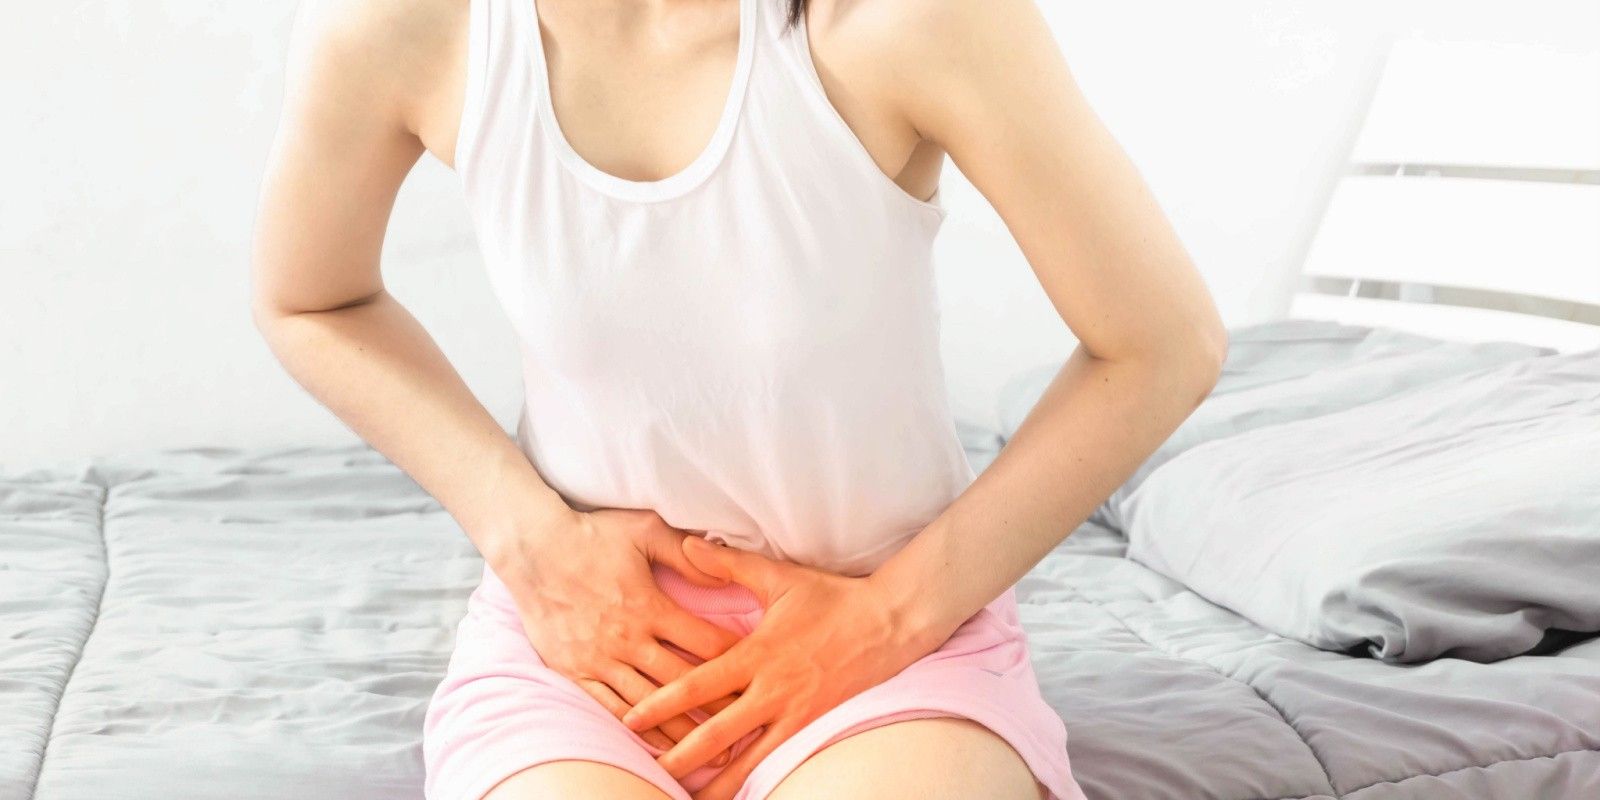 a woman is experiencing pain during ovulation